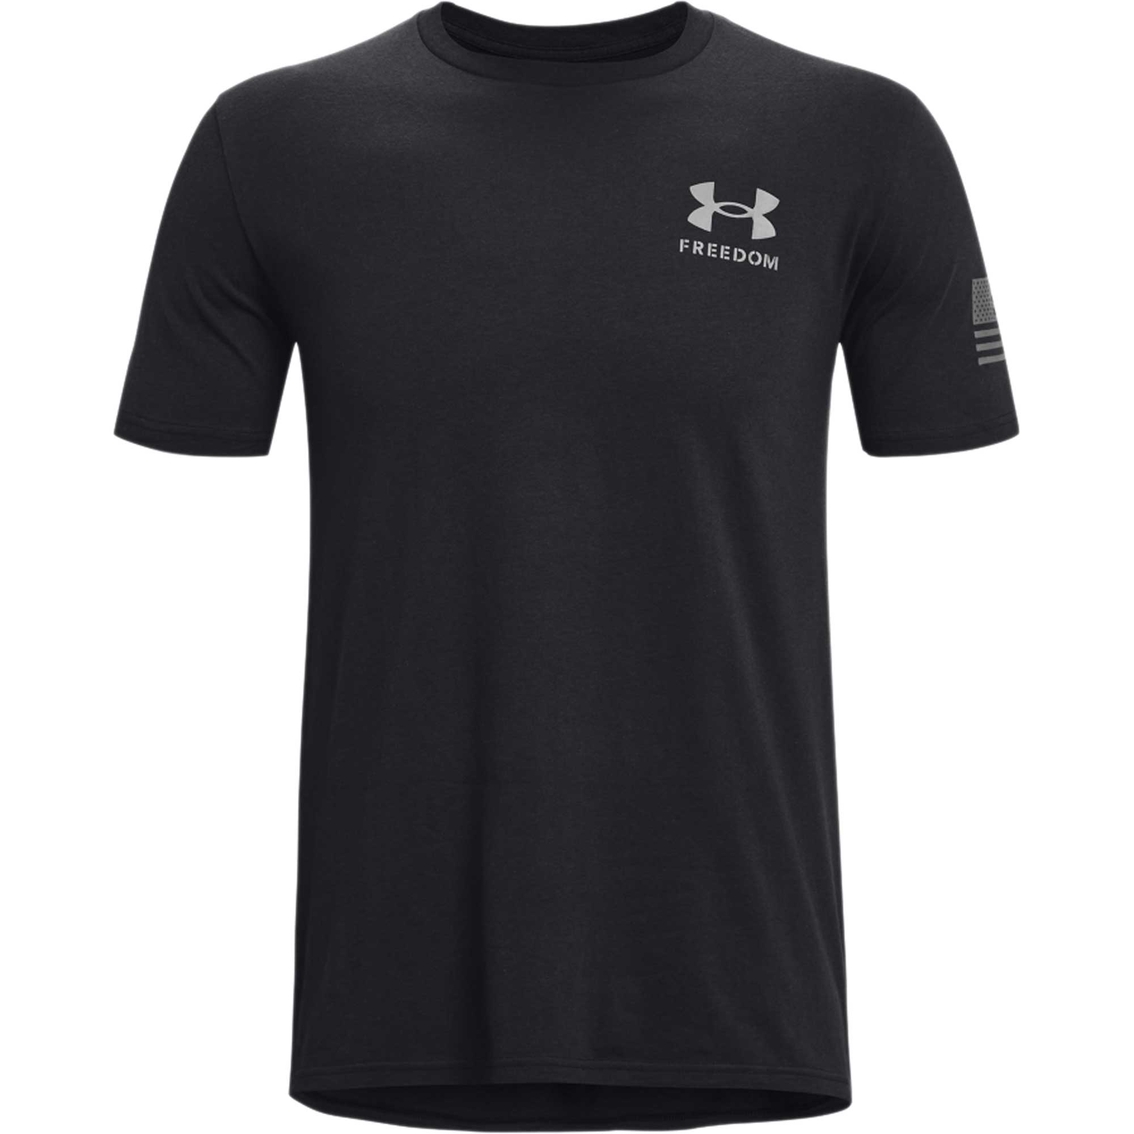 Under Armour New Freedom Banner Tee